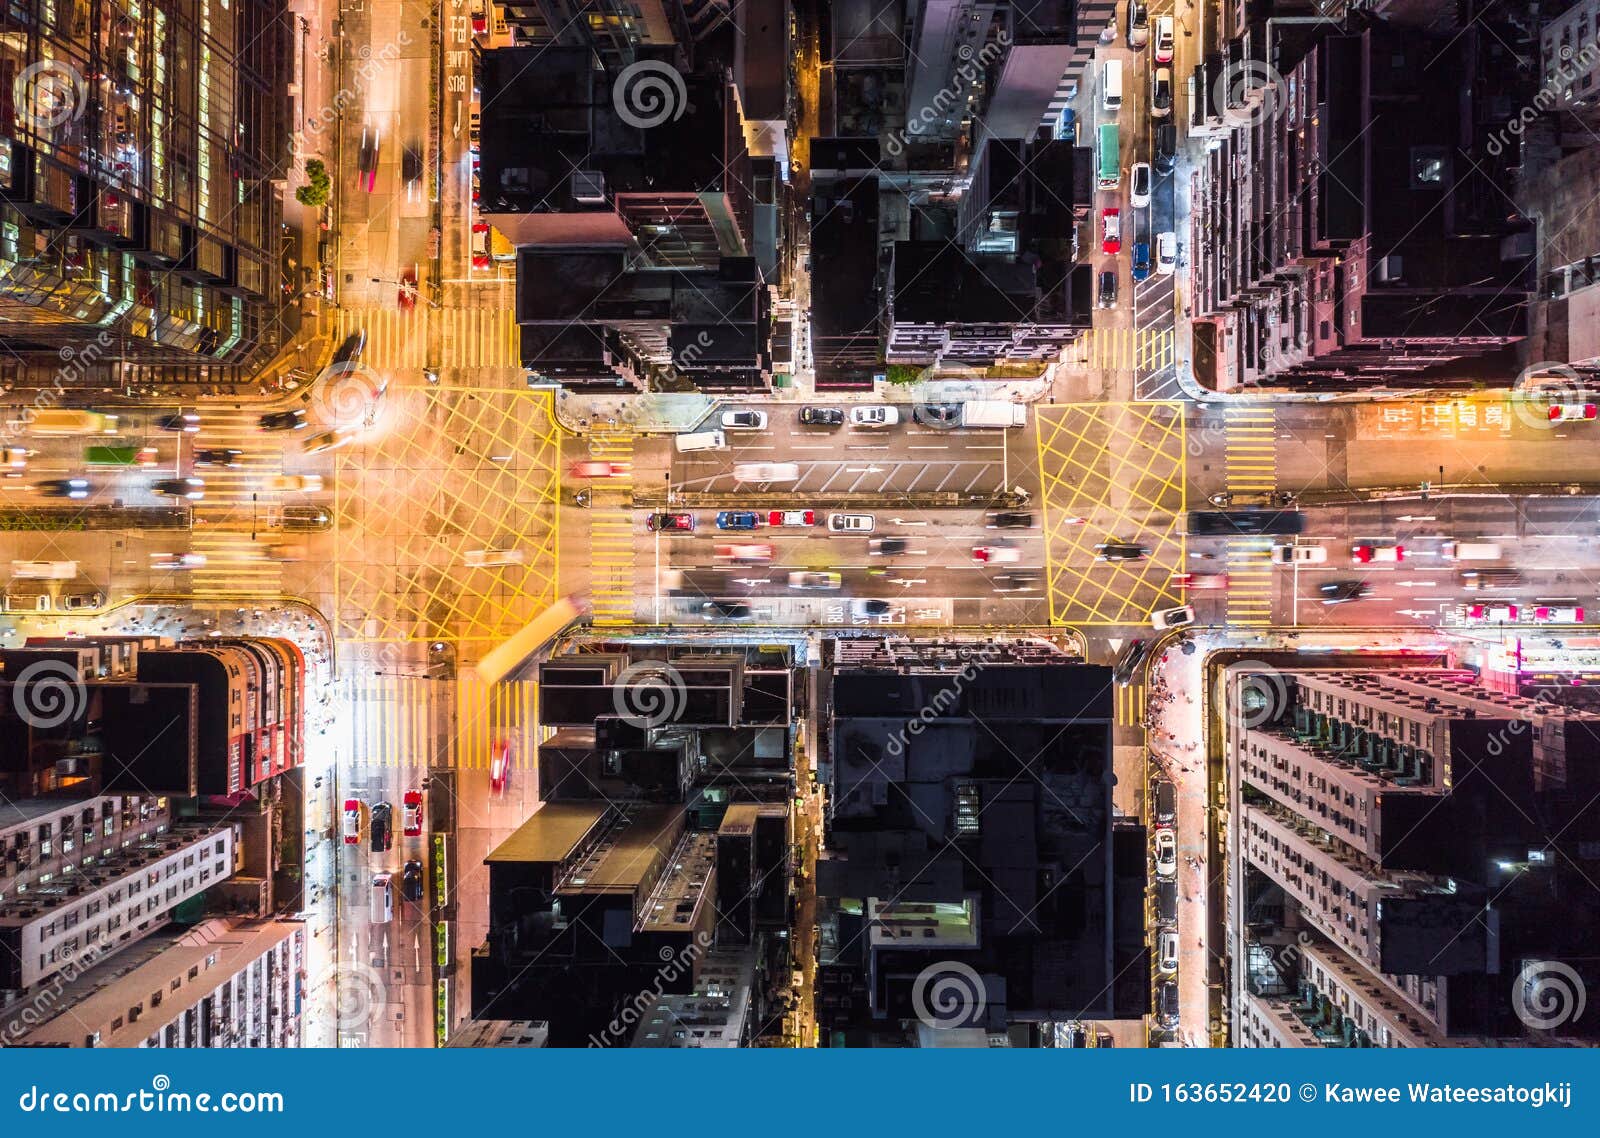 car, taxi, and bus traffic on road intersection at night in hong kong downtown district, drone aerial top view. asia city life